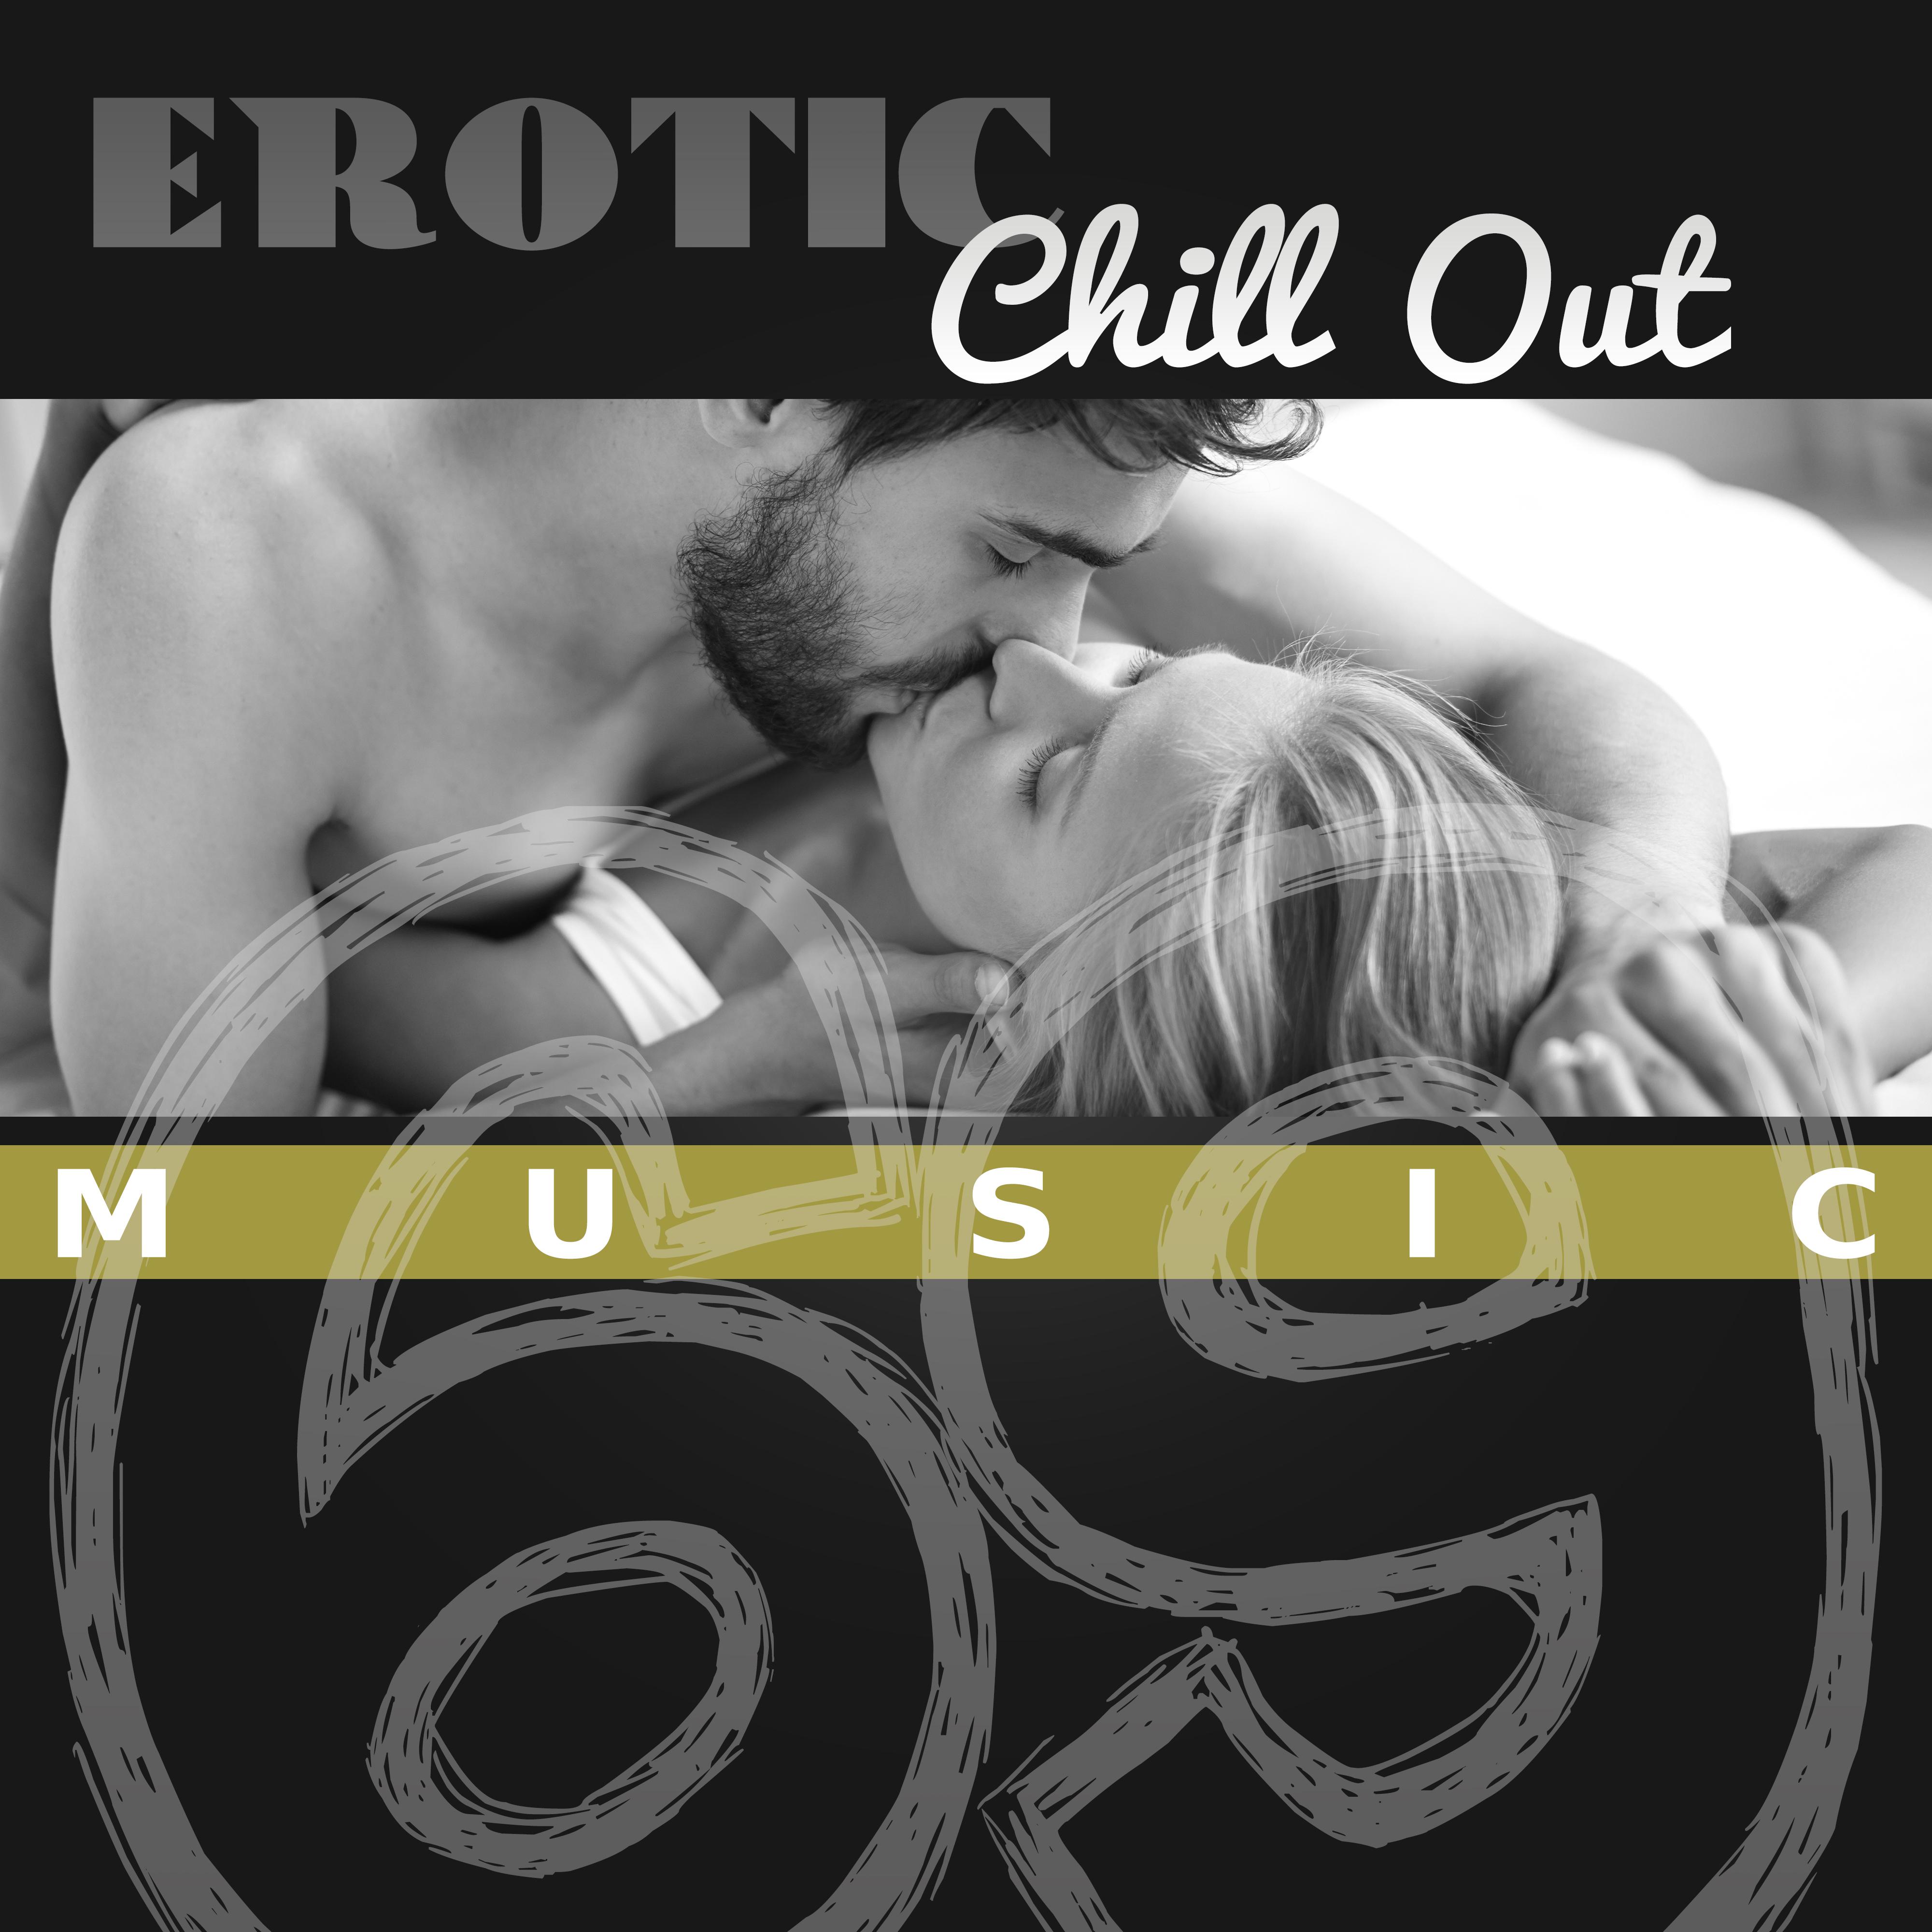 Erotic Chill Out Music 69 – Sensual Music for Lovers, **** Chill, Fancy Games, Tantric ***, Making Love, **** Night